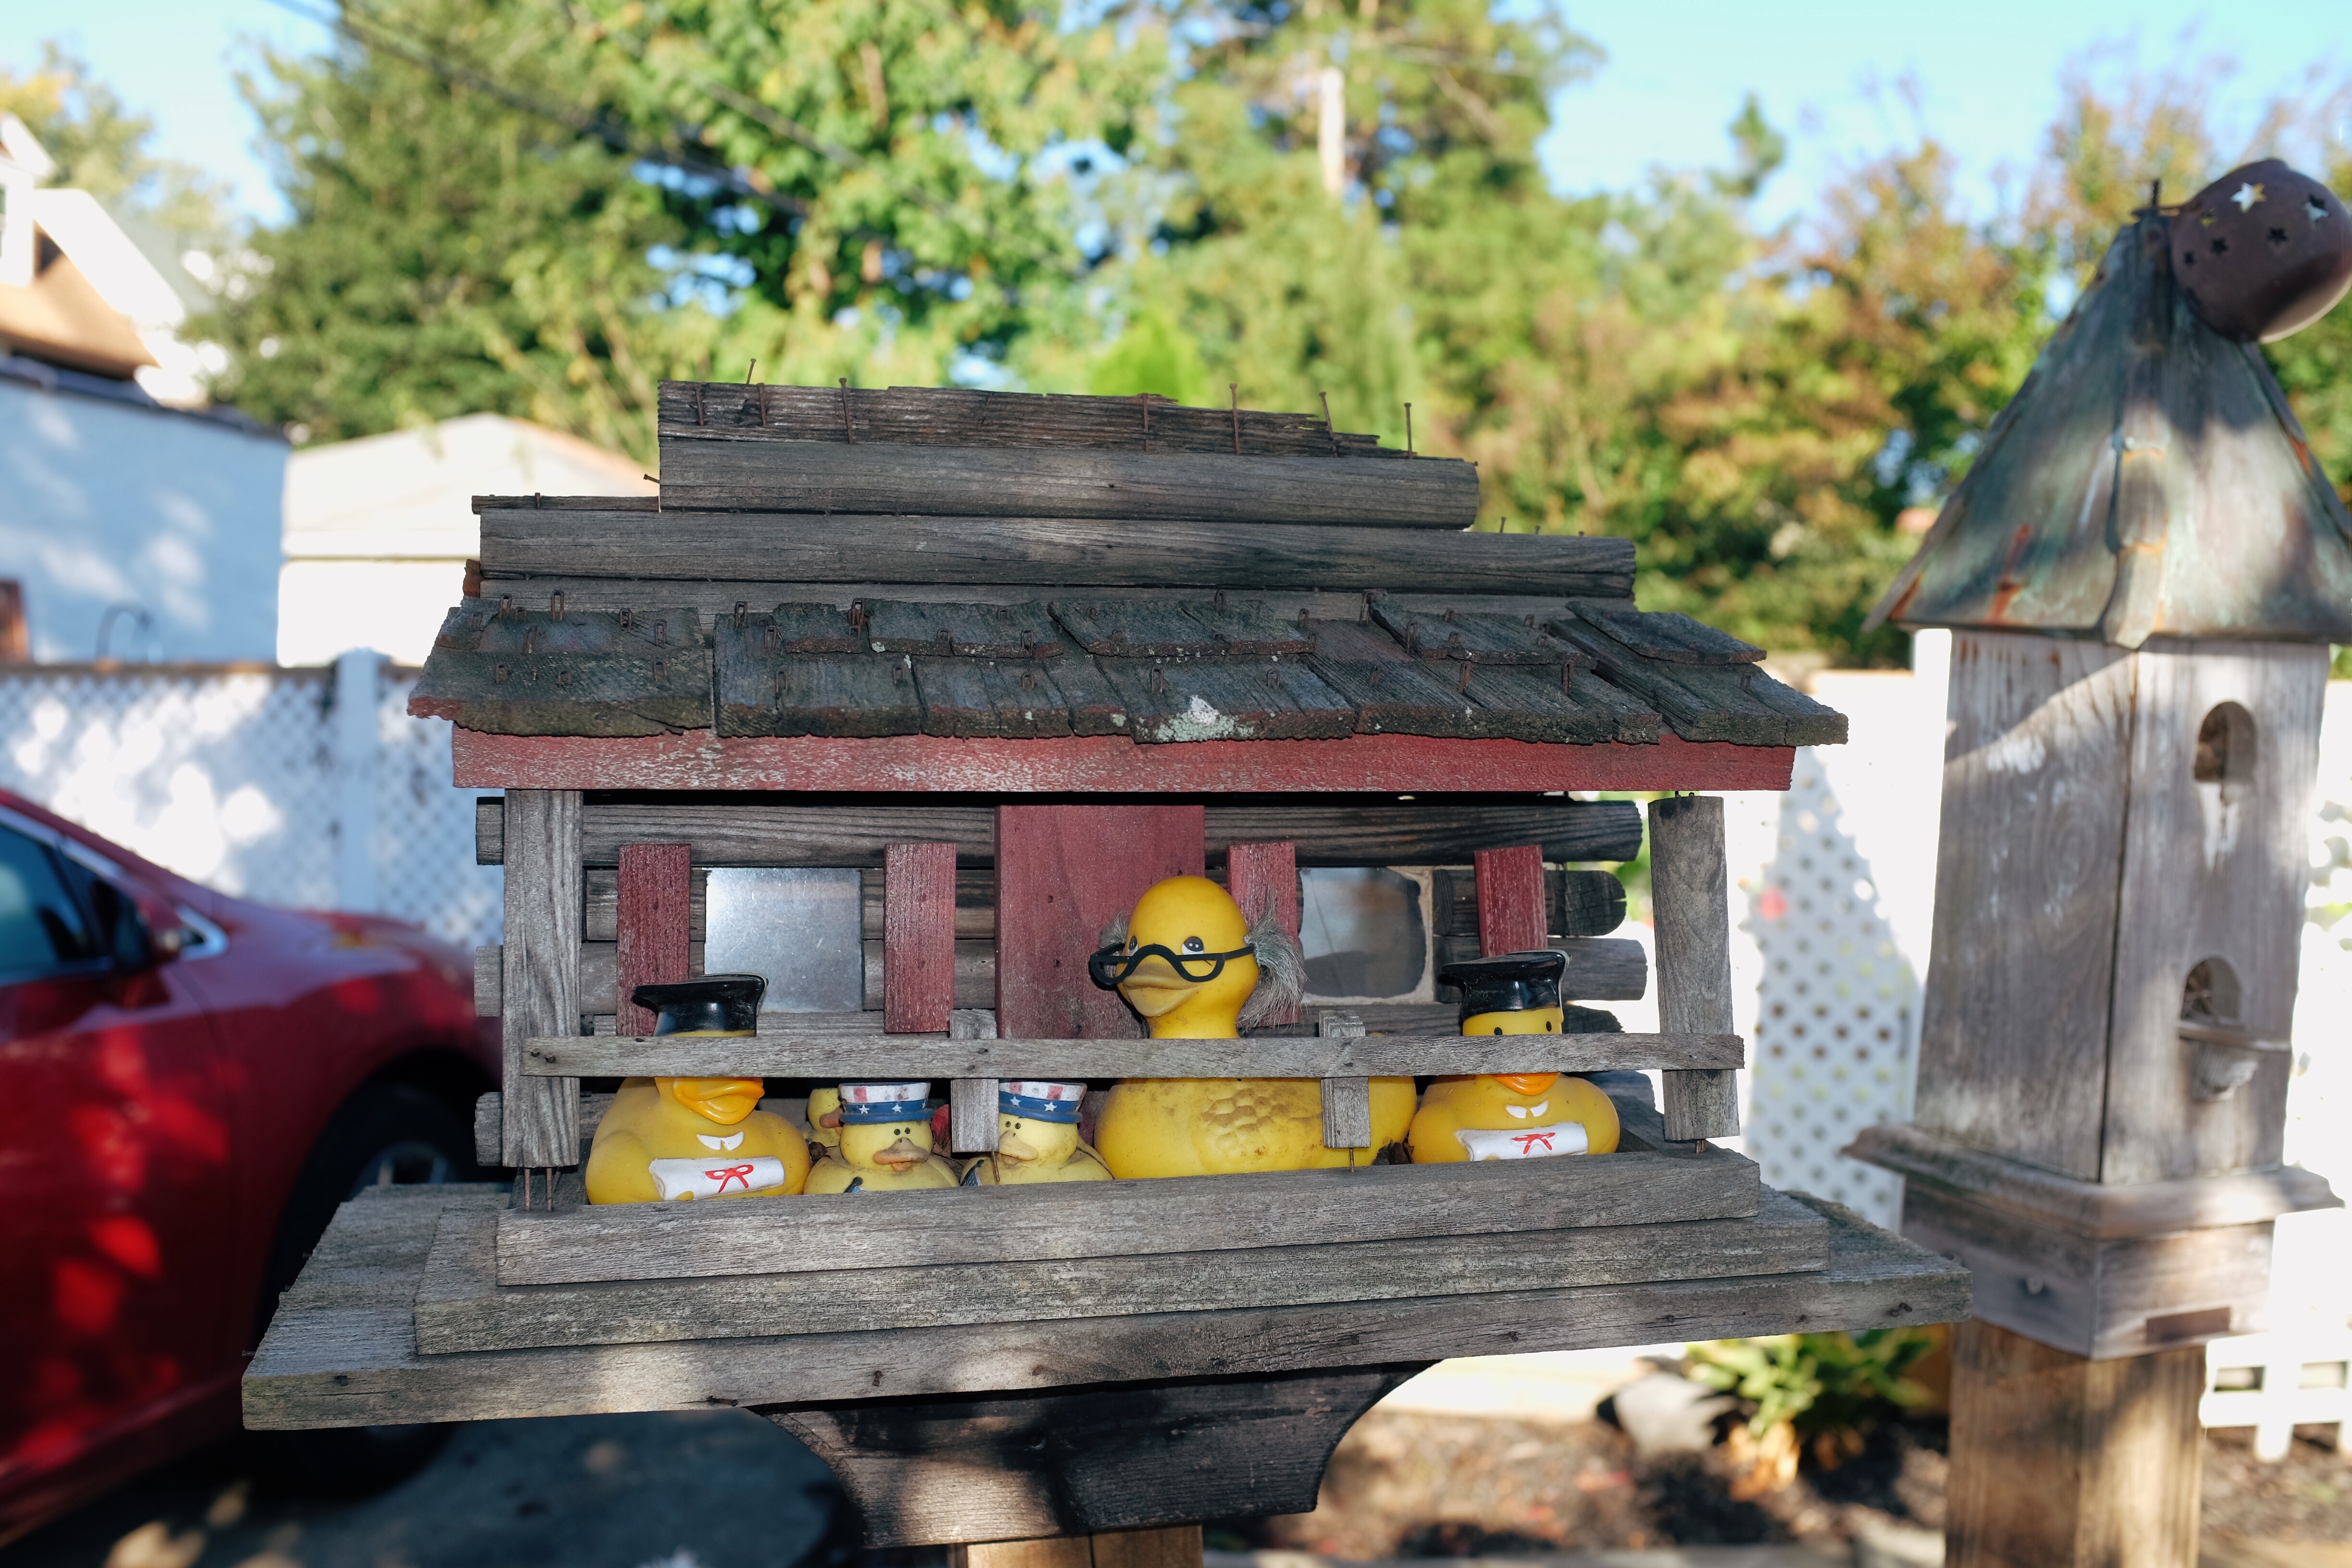 Rubber ducks lined up in a birdhouse